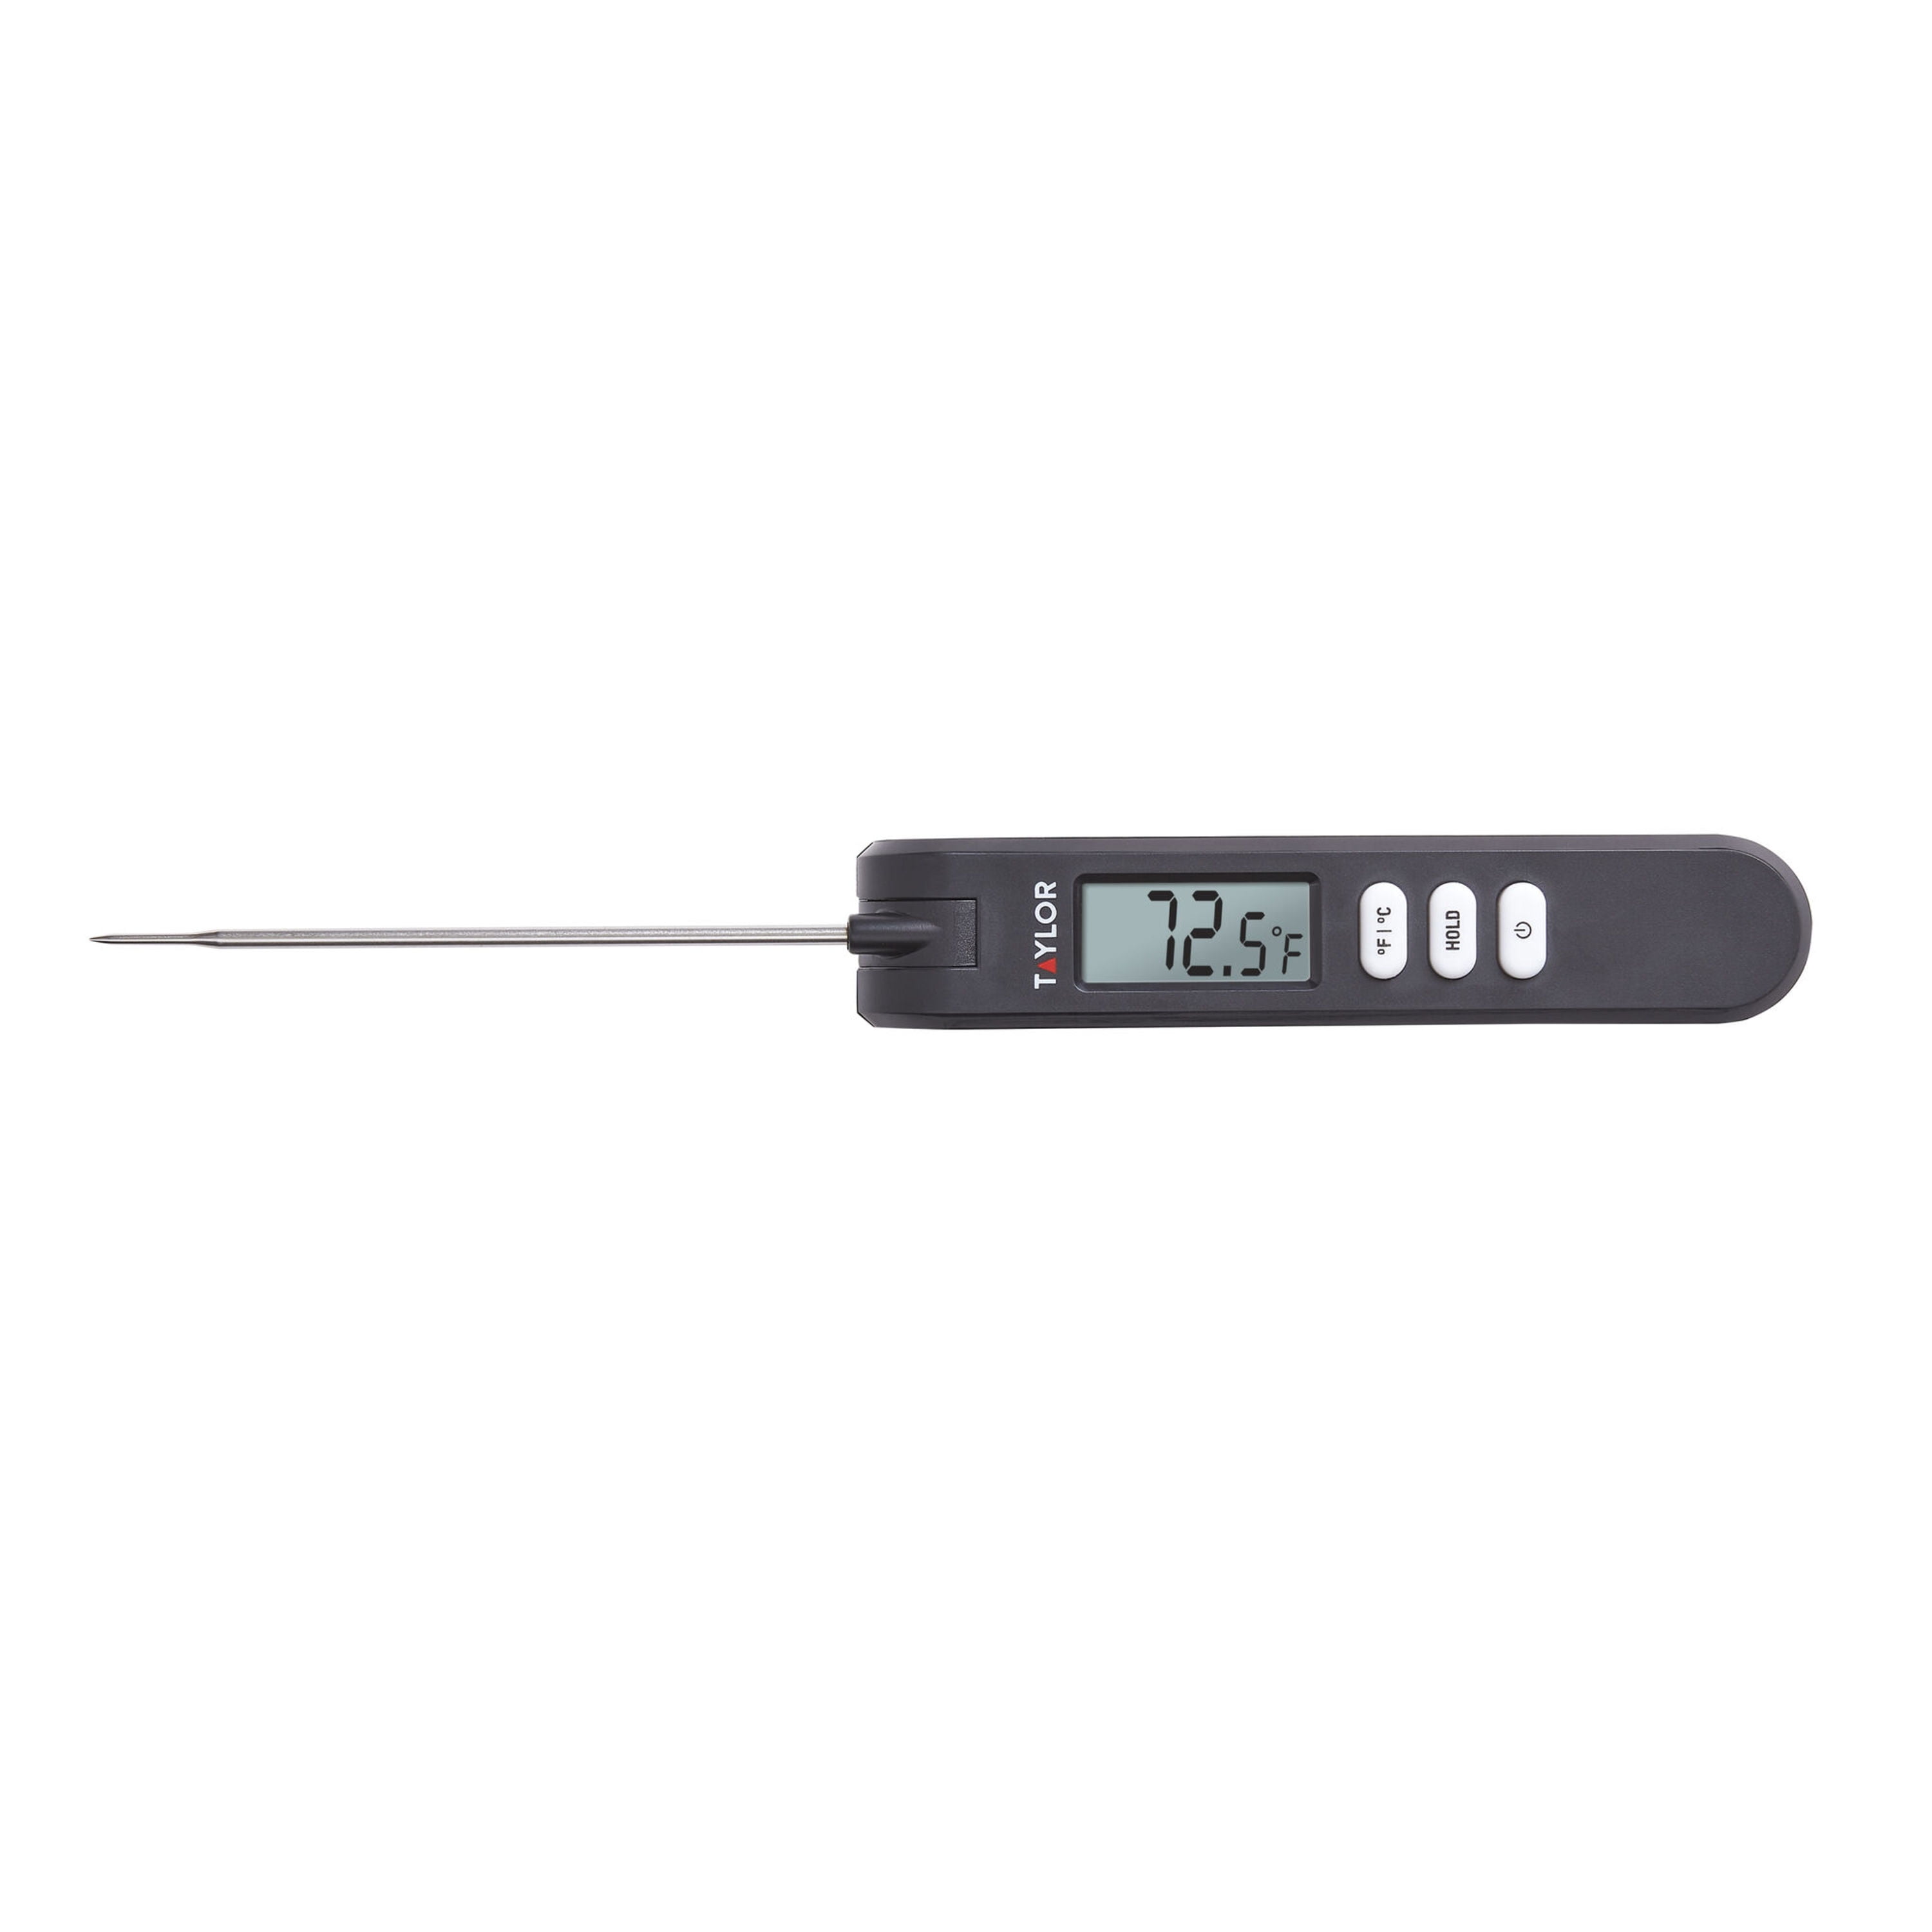 Taylor Digital Thermometer Plastic Black 7.68 in. - Ace Hardware